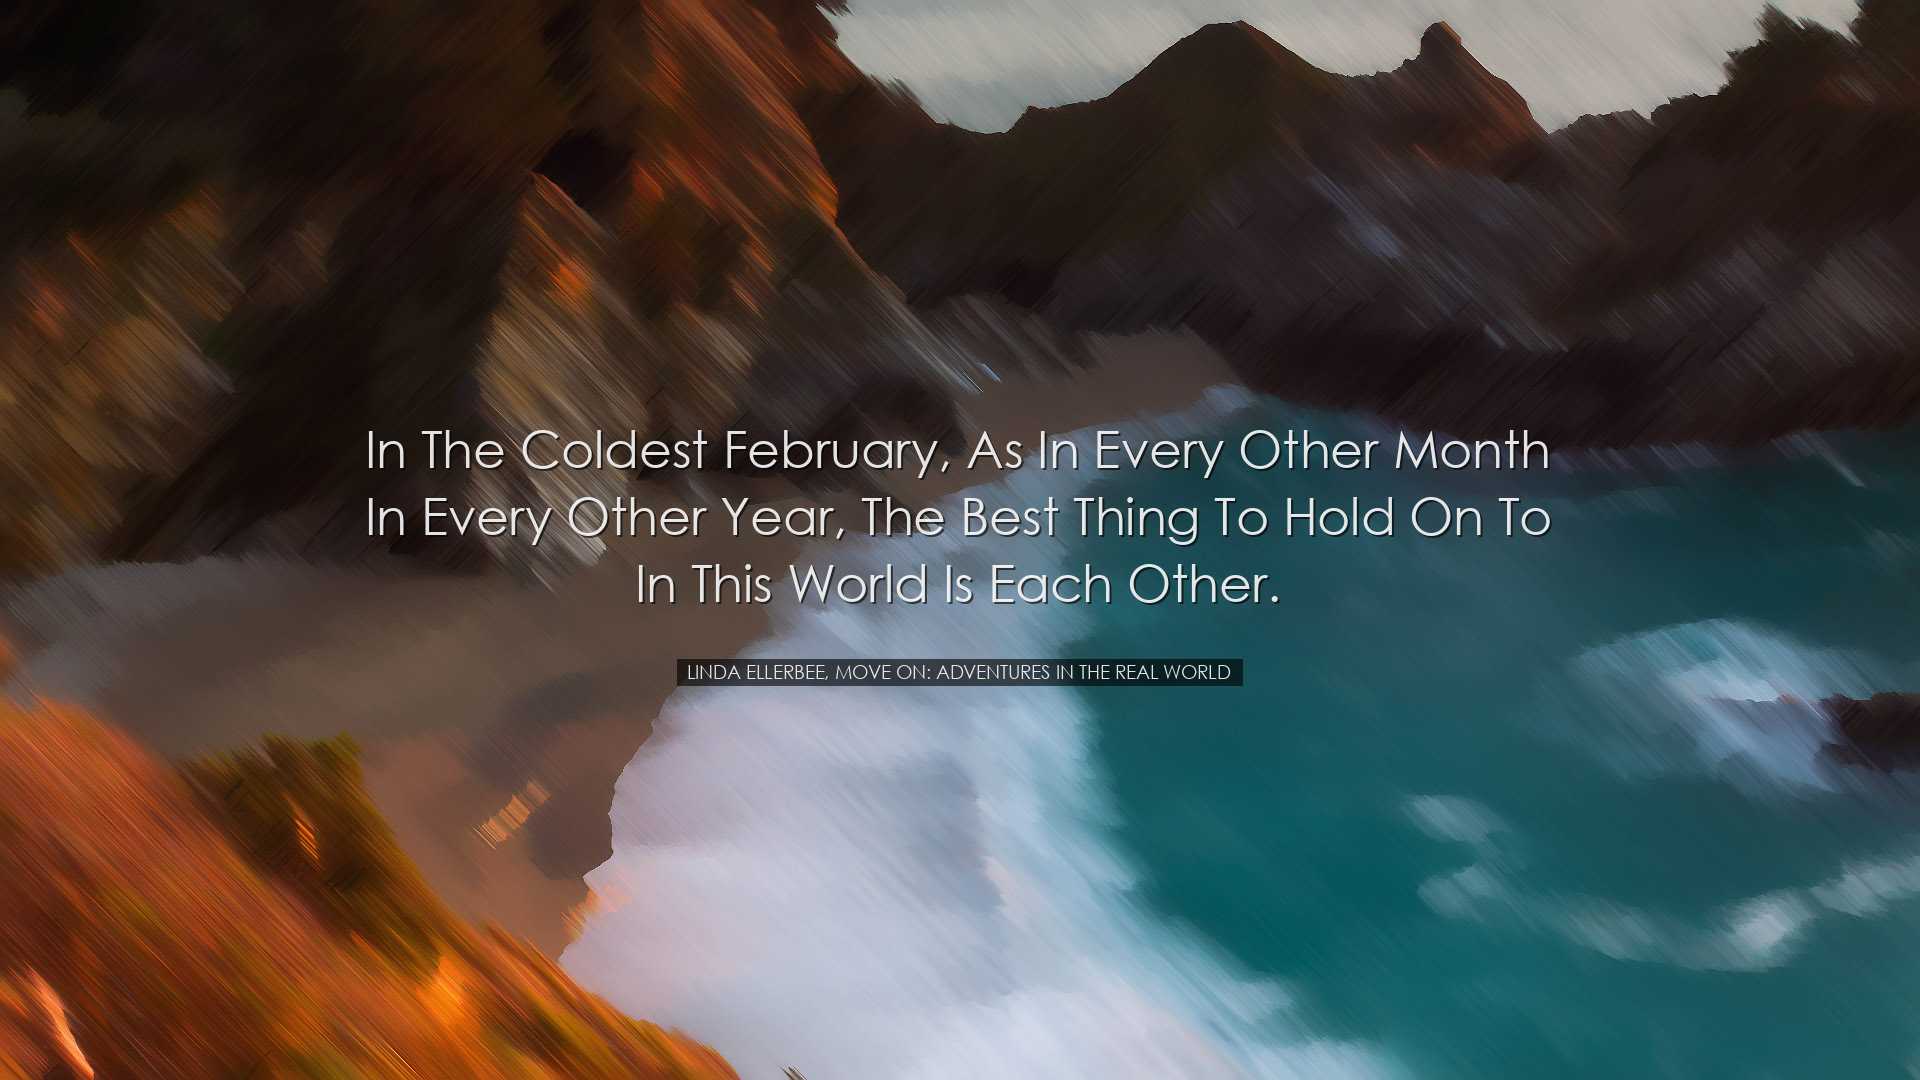 In the coldest February, as in every other month in every other ye